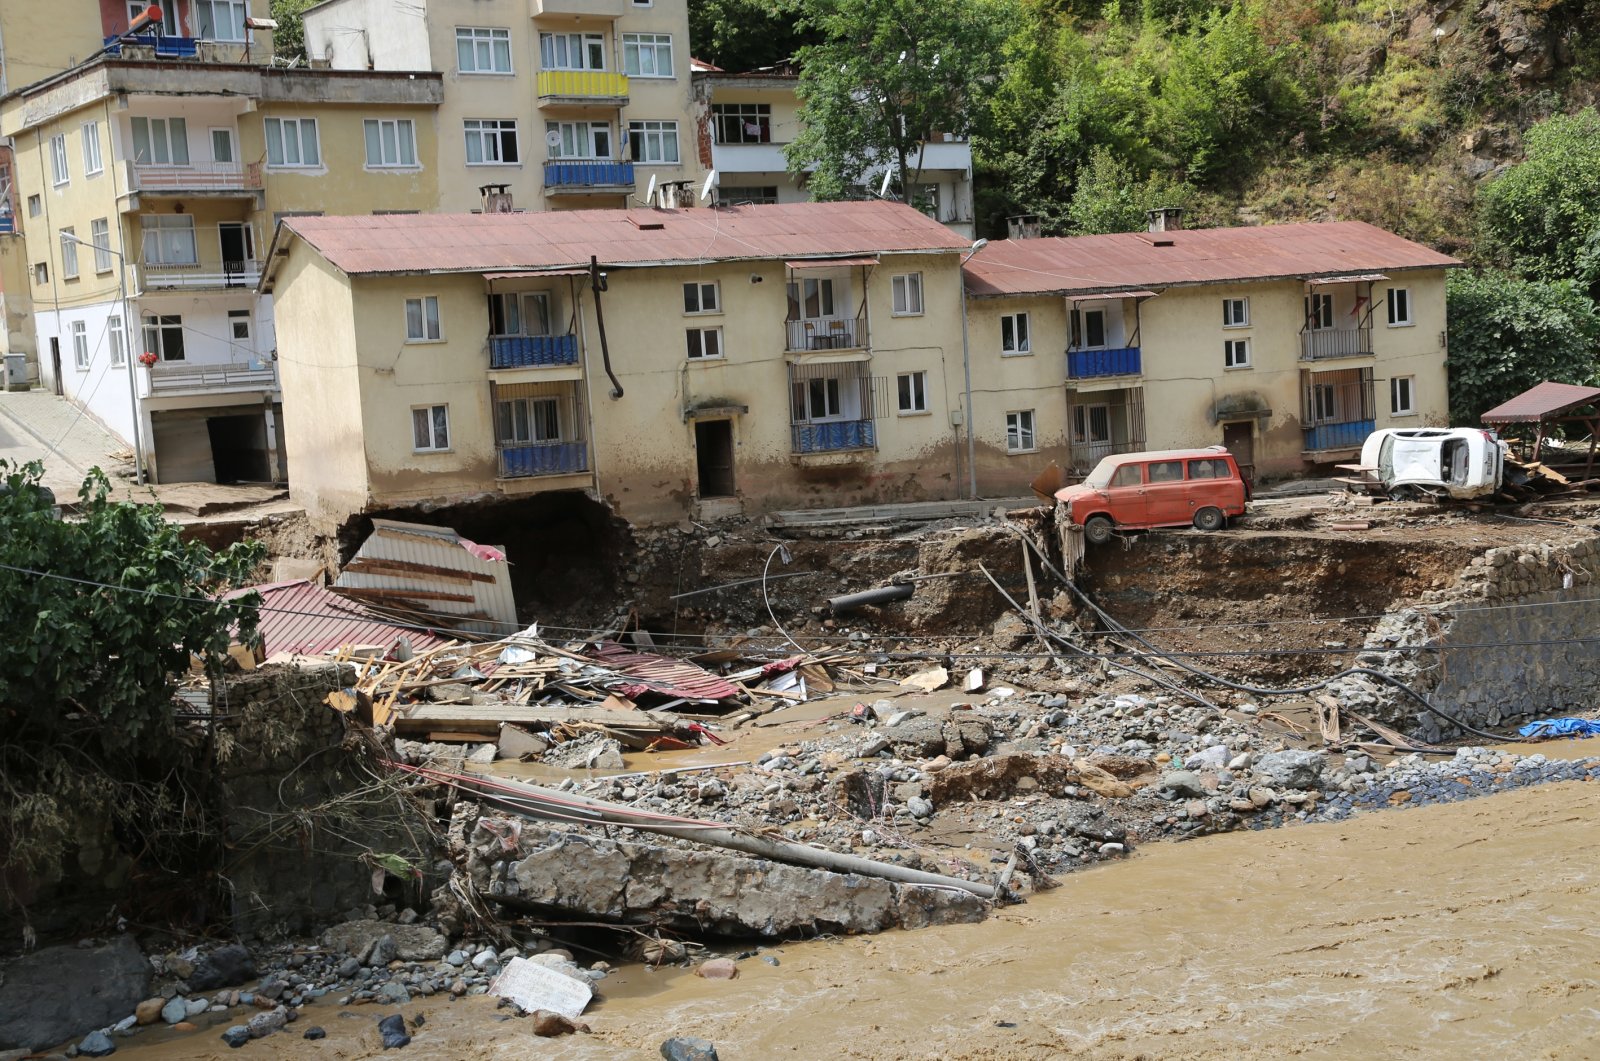 A general view of the destruction caused by the flash floods in Giresun, Turkey, Aug. 23, 2020. (AA Photo)